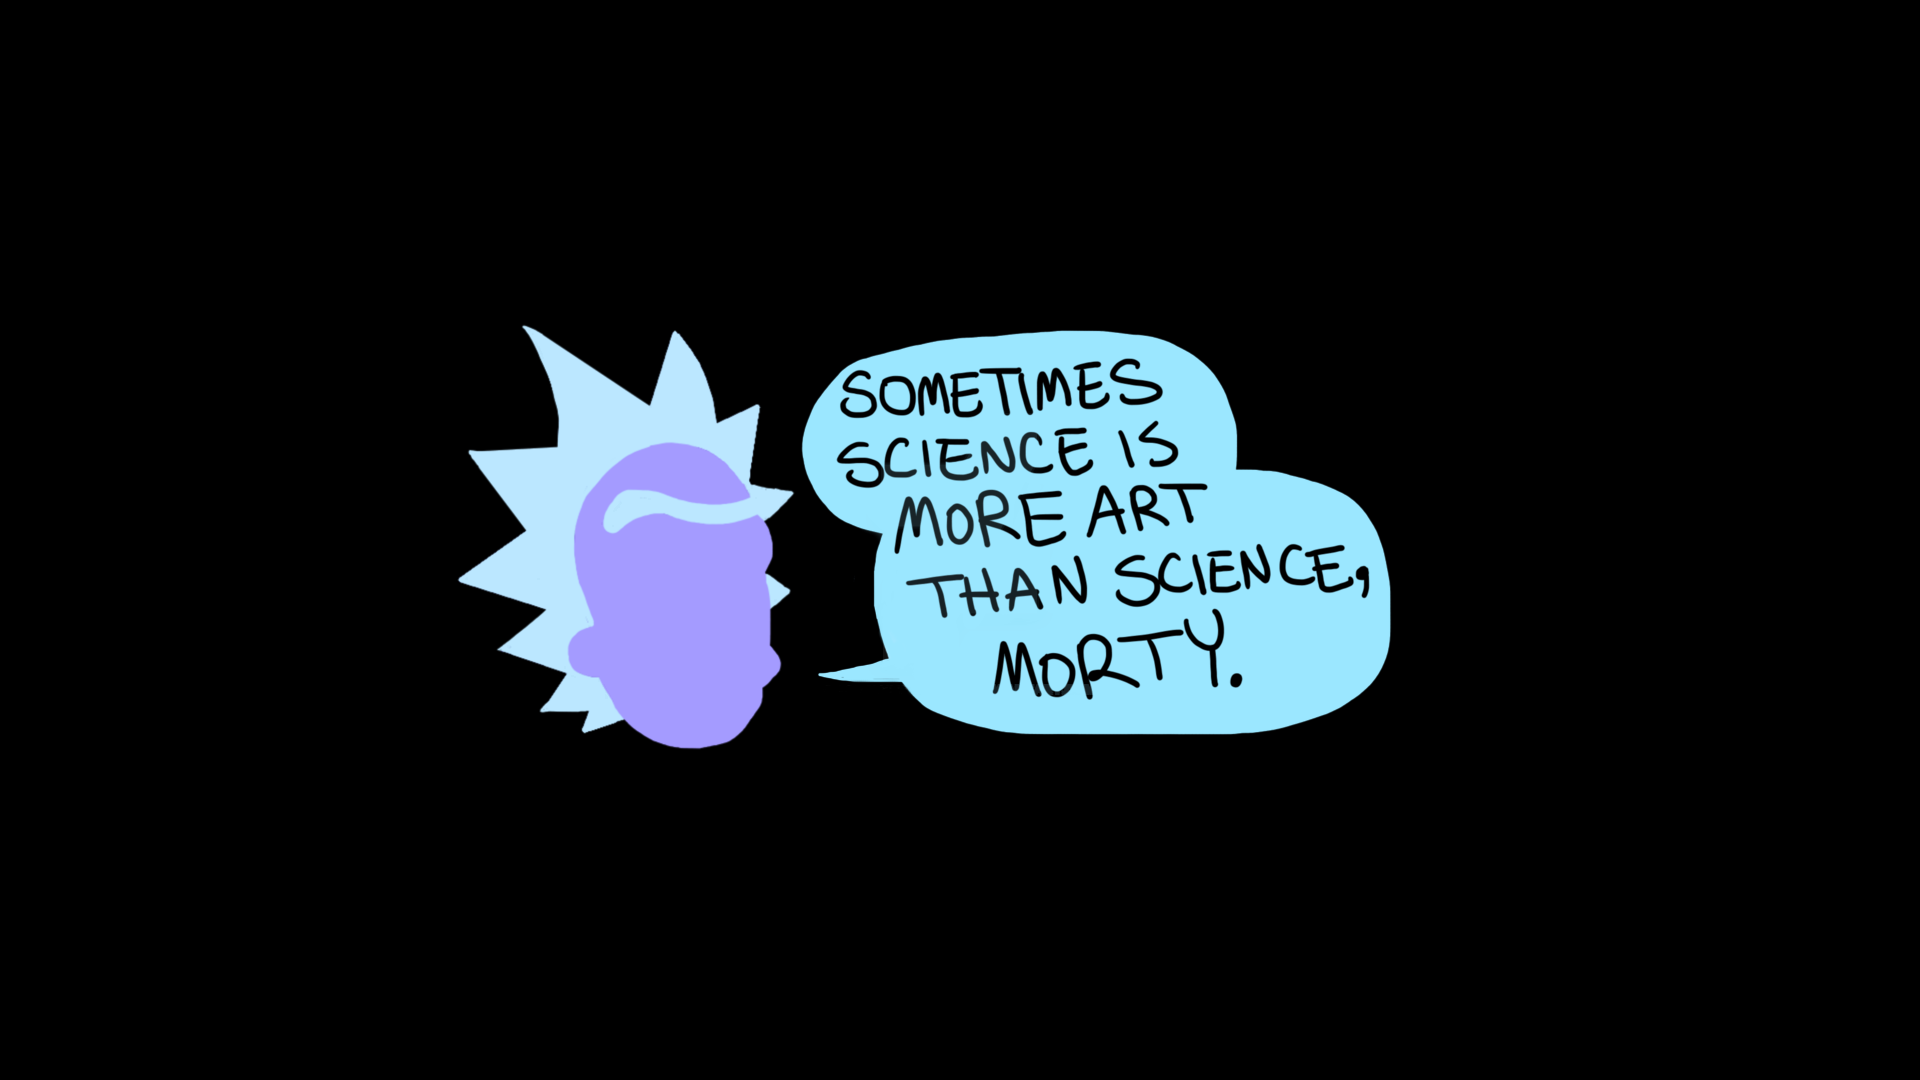 General 1920x1080 Rick and Morty Rick Sanchez quote science simple background black background cyan TV series minimalism